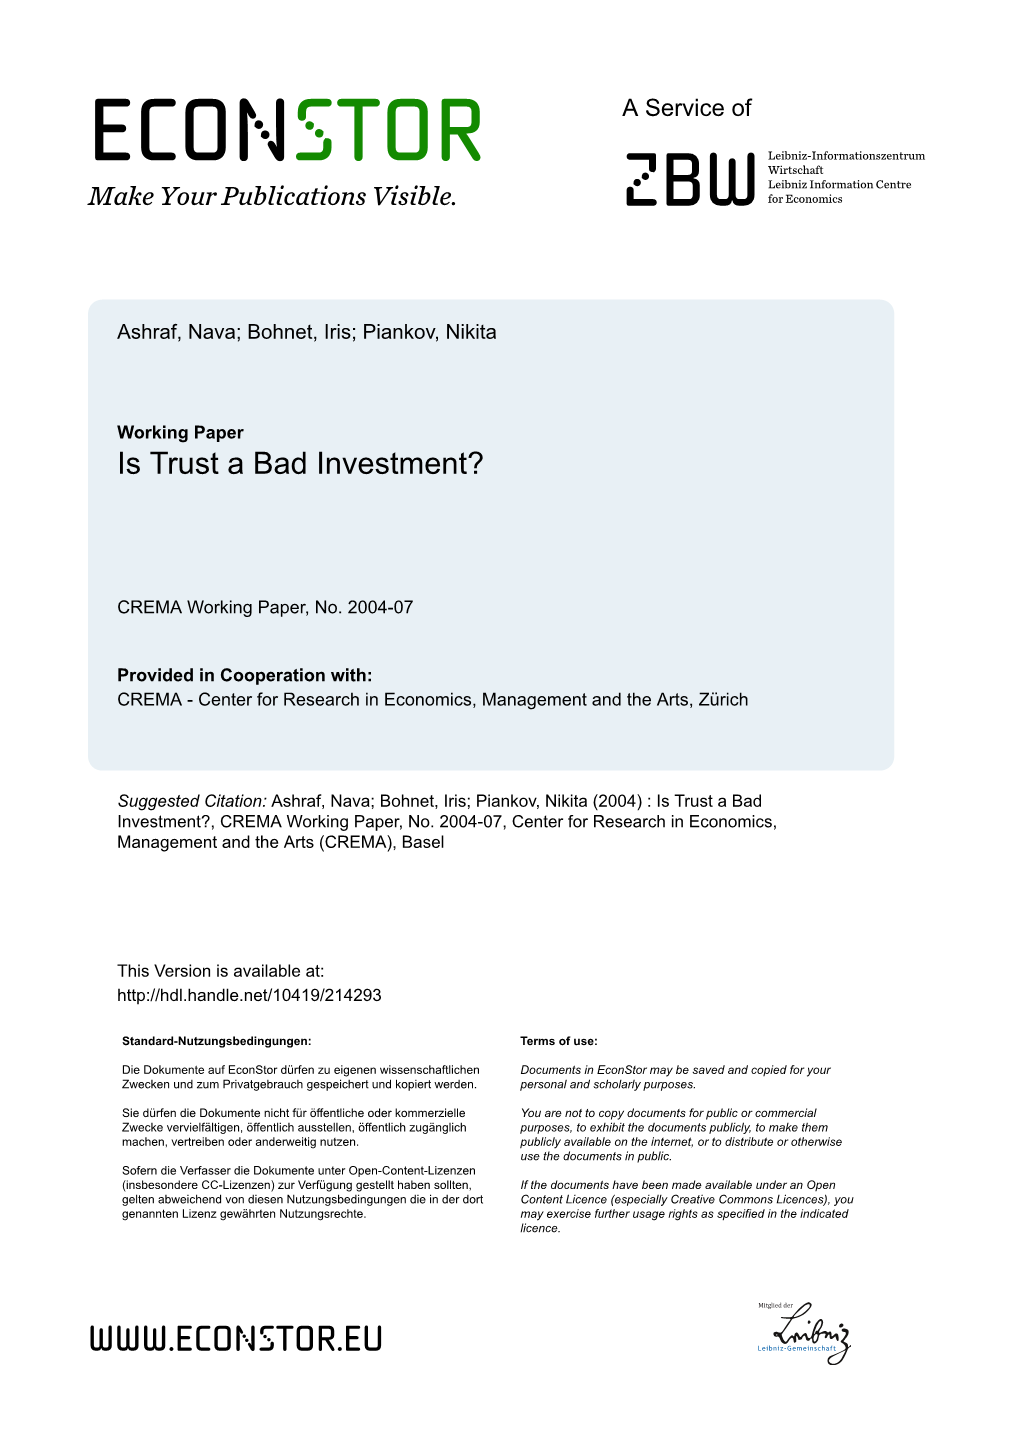 Is Trust a Bad Investment?